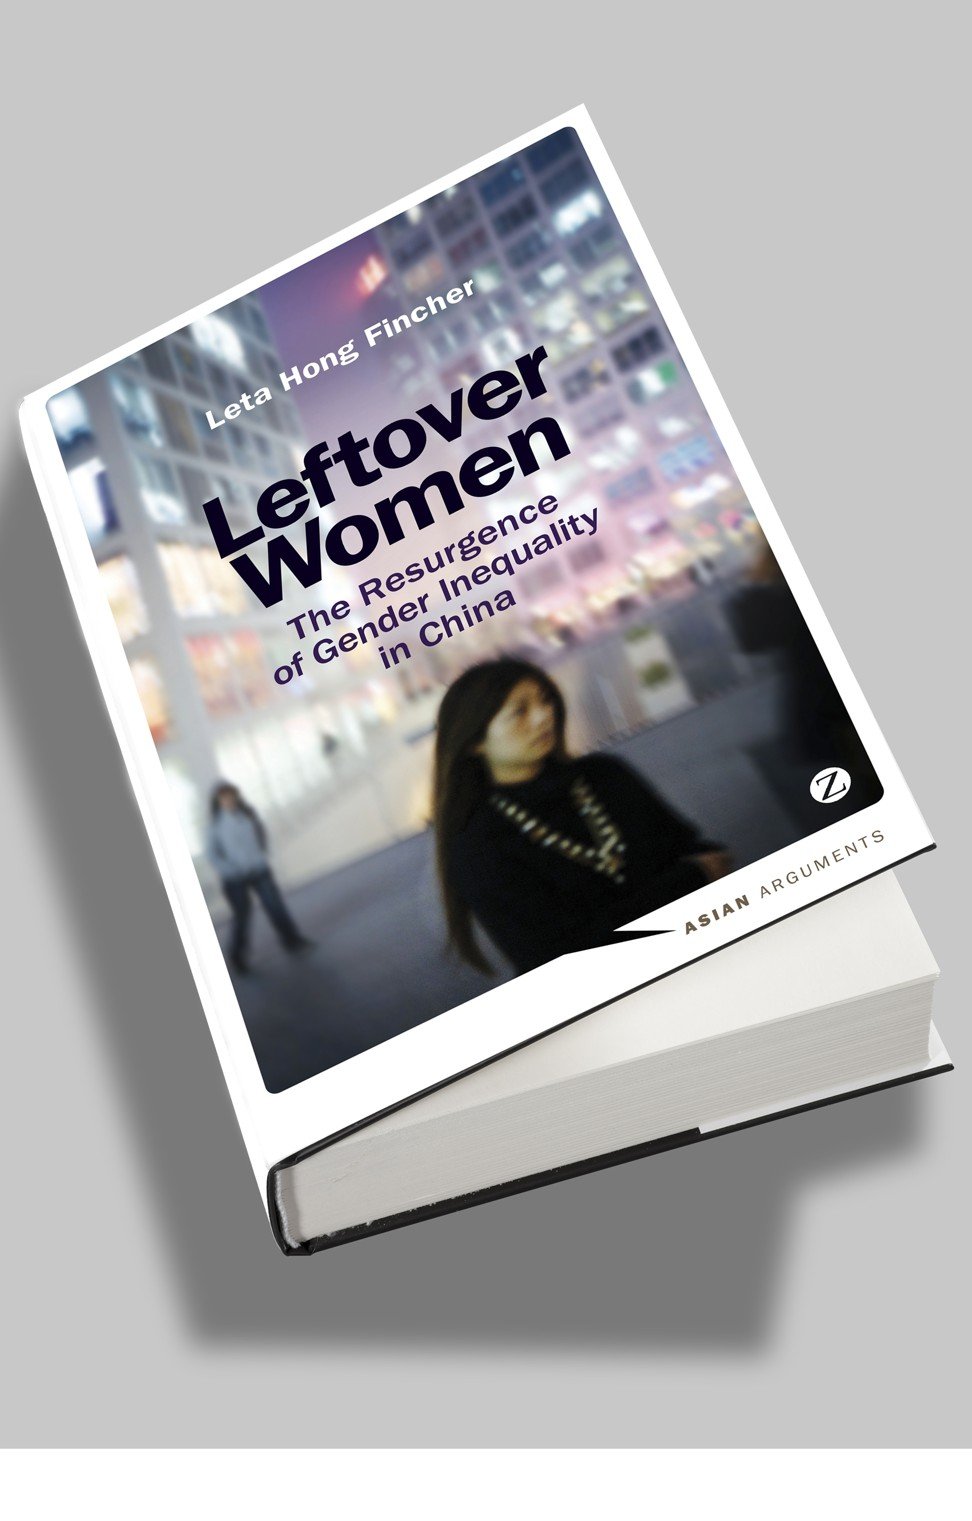 Leftover Women: The Resurgence of Gender Inequality in China by Leta Hong Fincher.